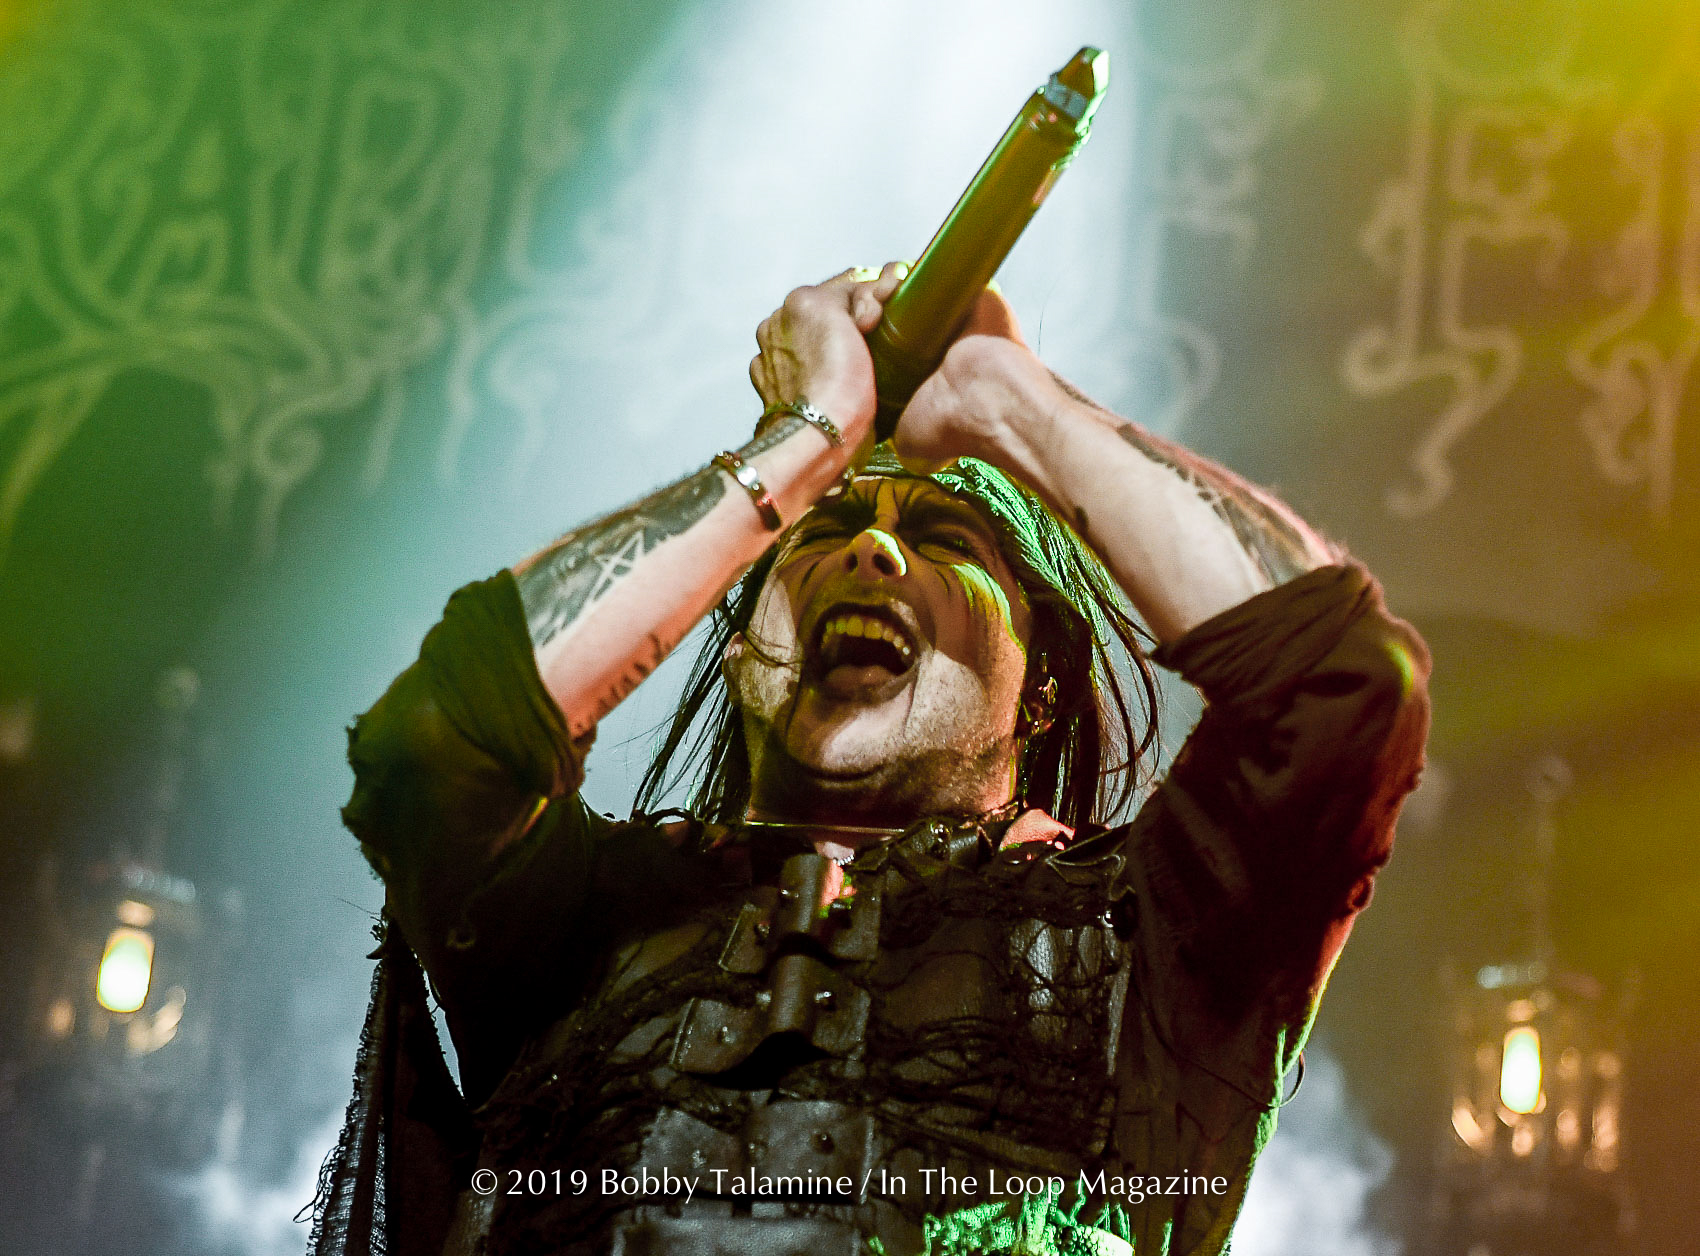 Live Review: The Noise Presents: Cradle of Filth – Cryptoriana World Tour 2019 At House of Blues Chicago